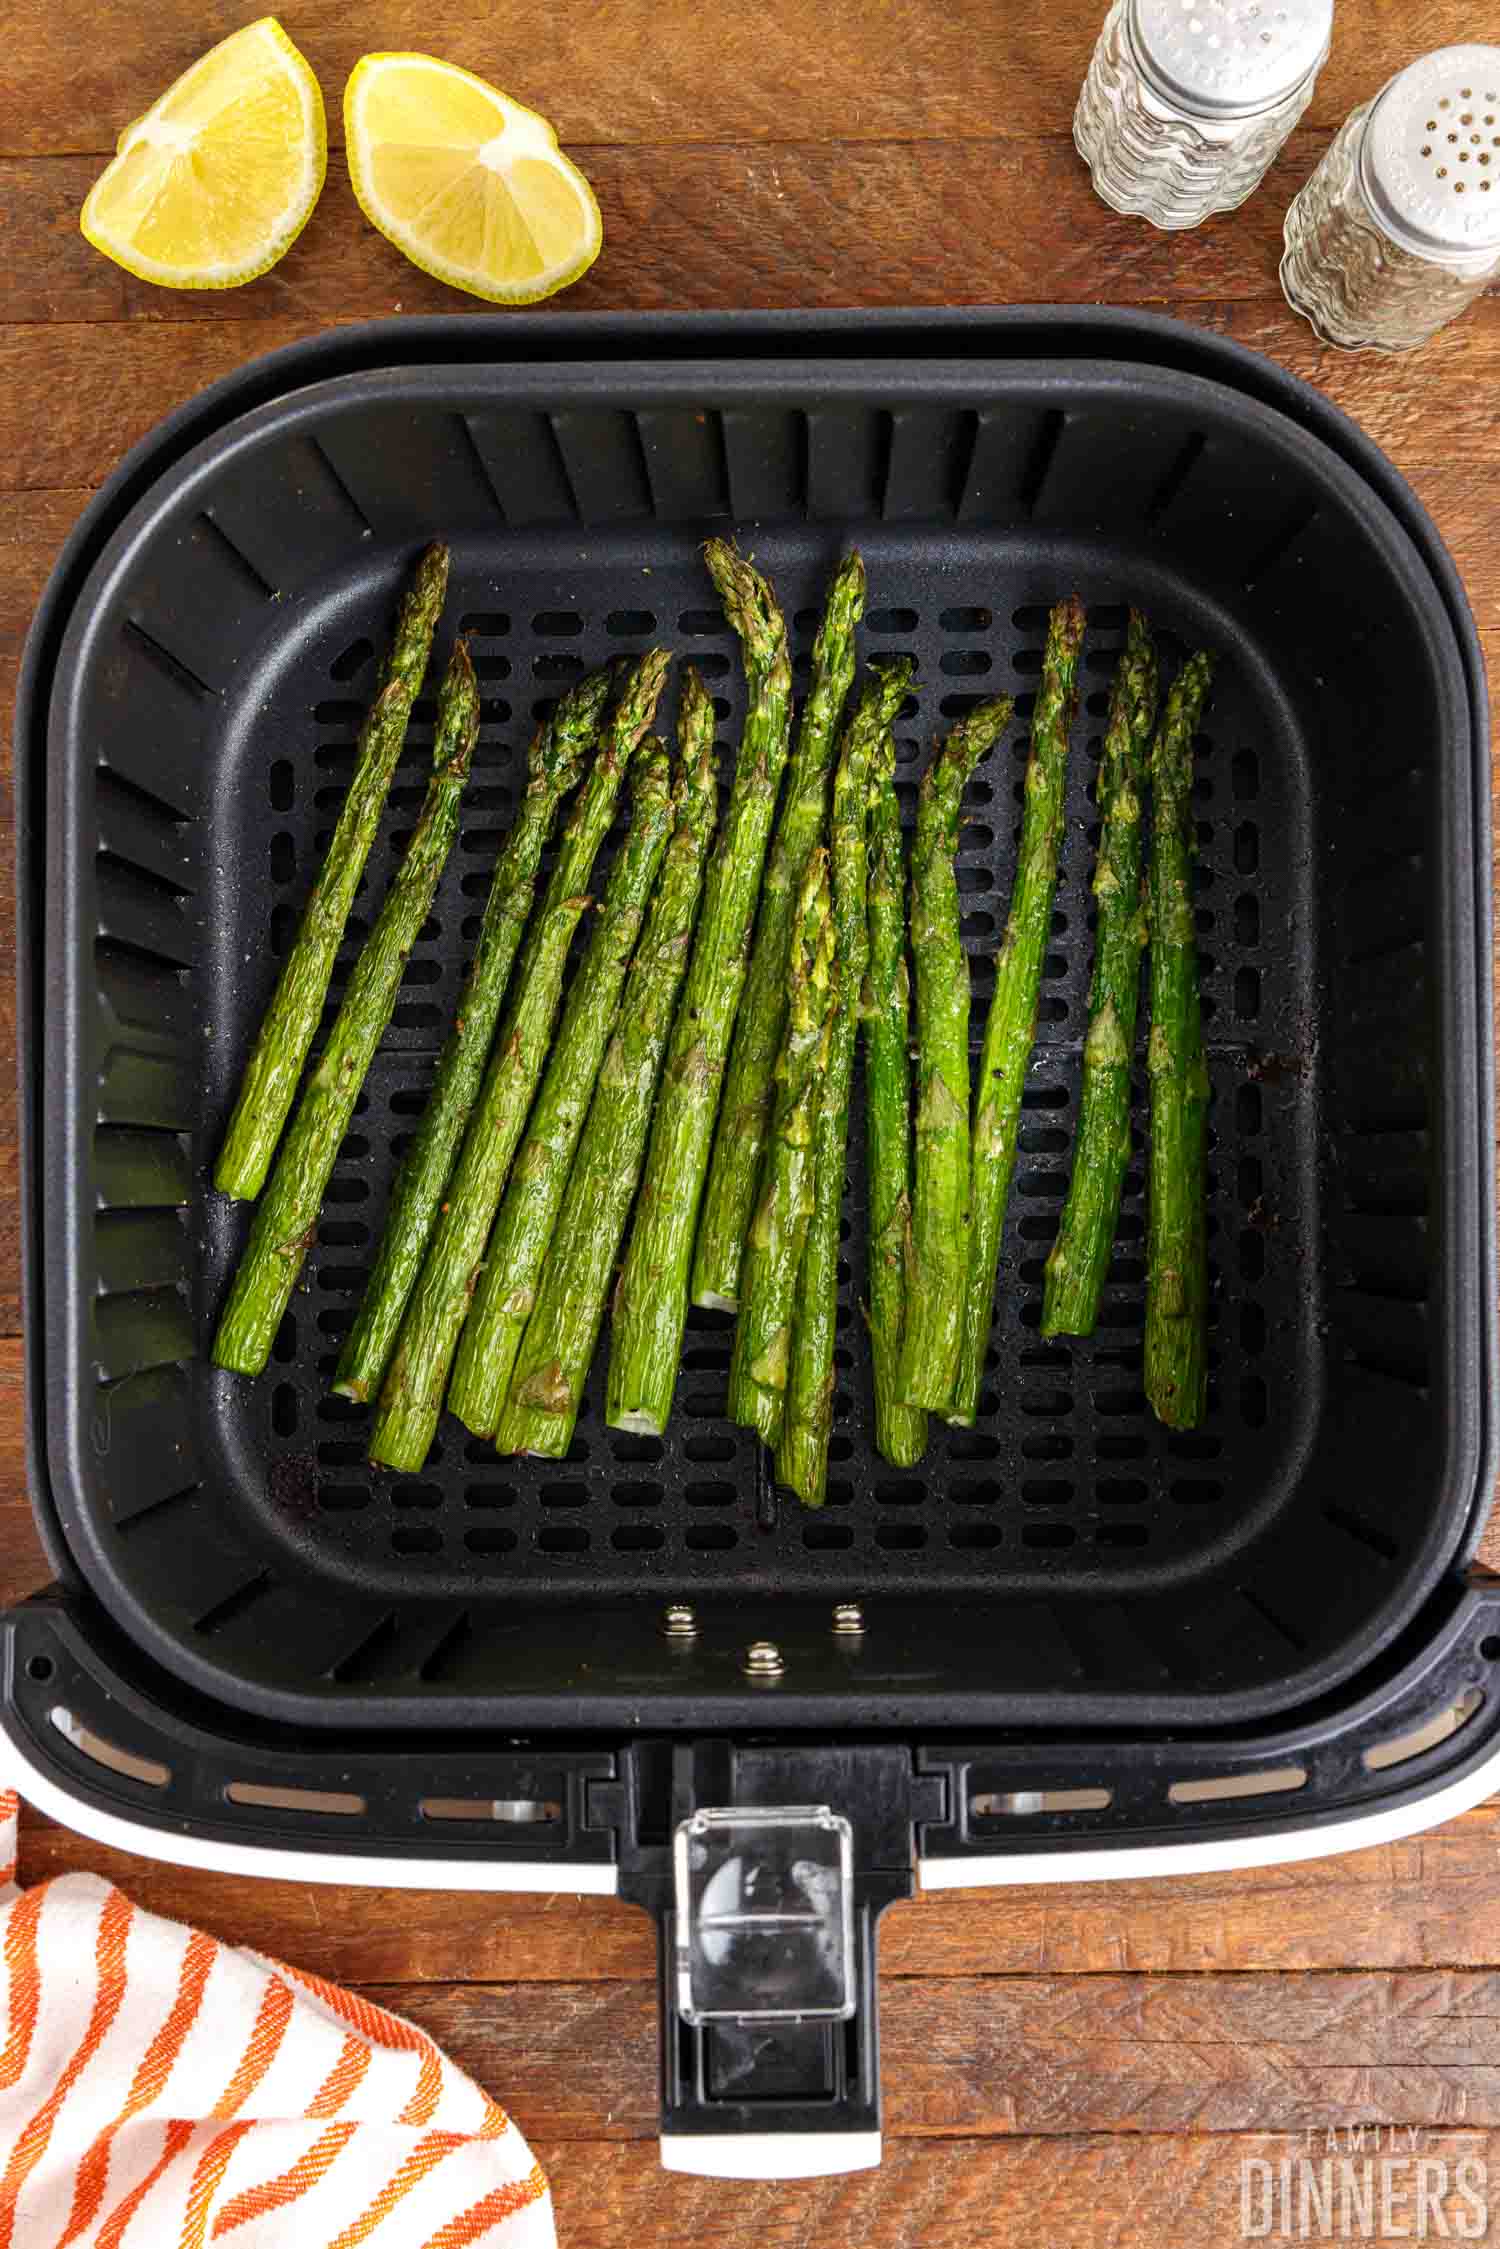 A batch of cooked asparagus stems in an air fryer basket.